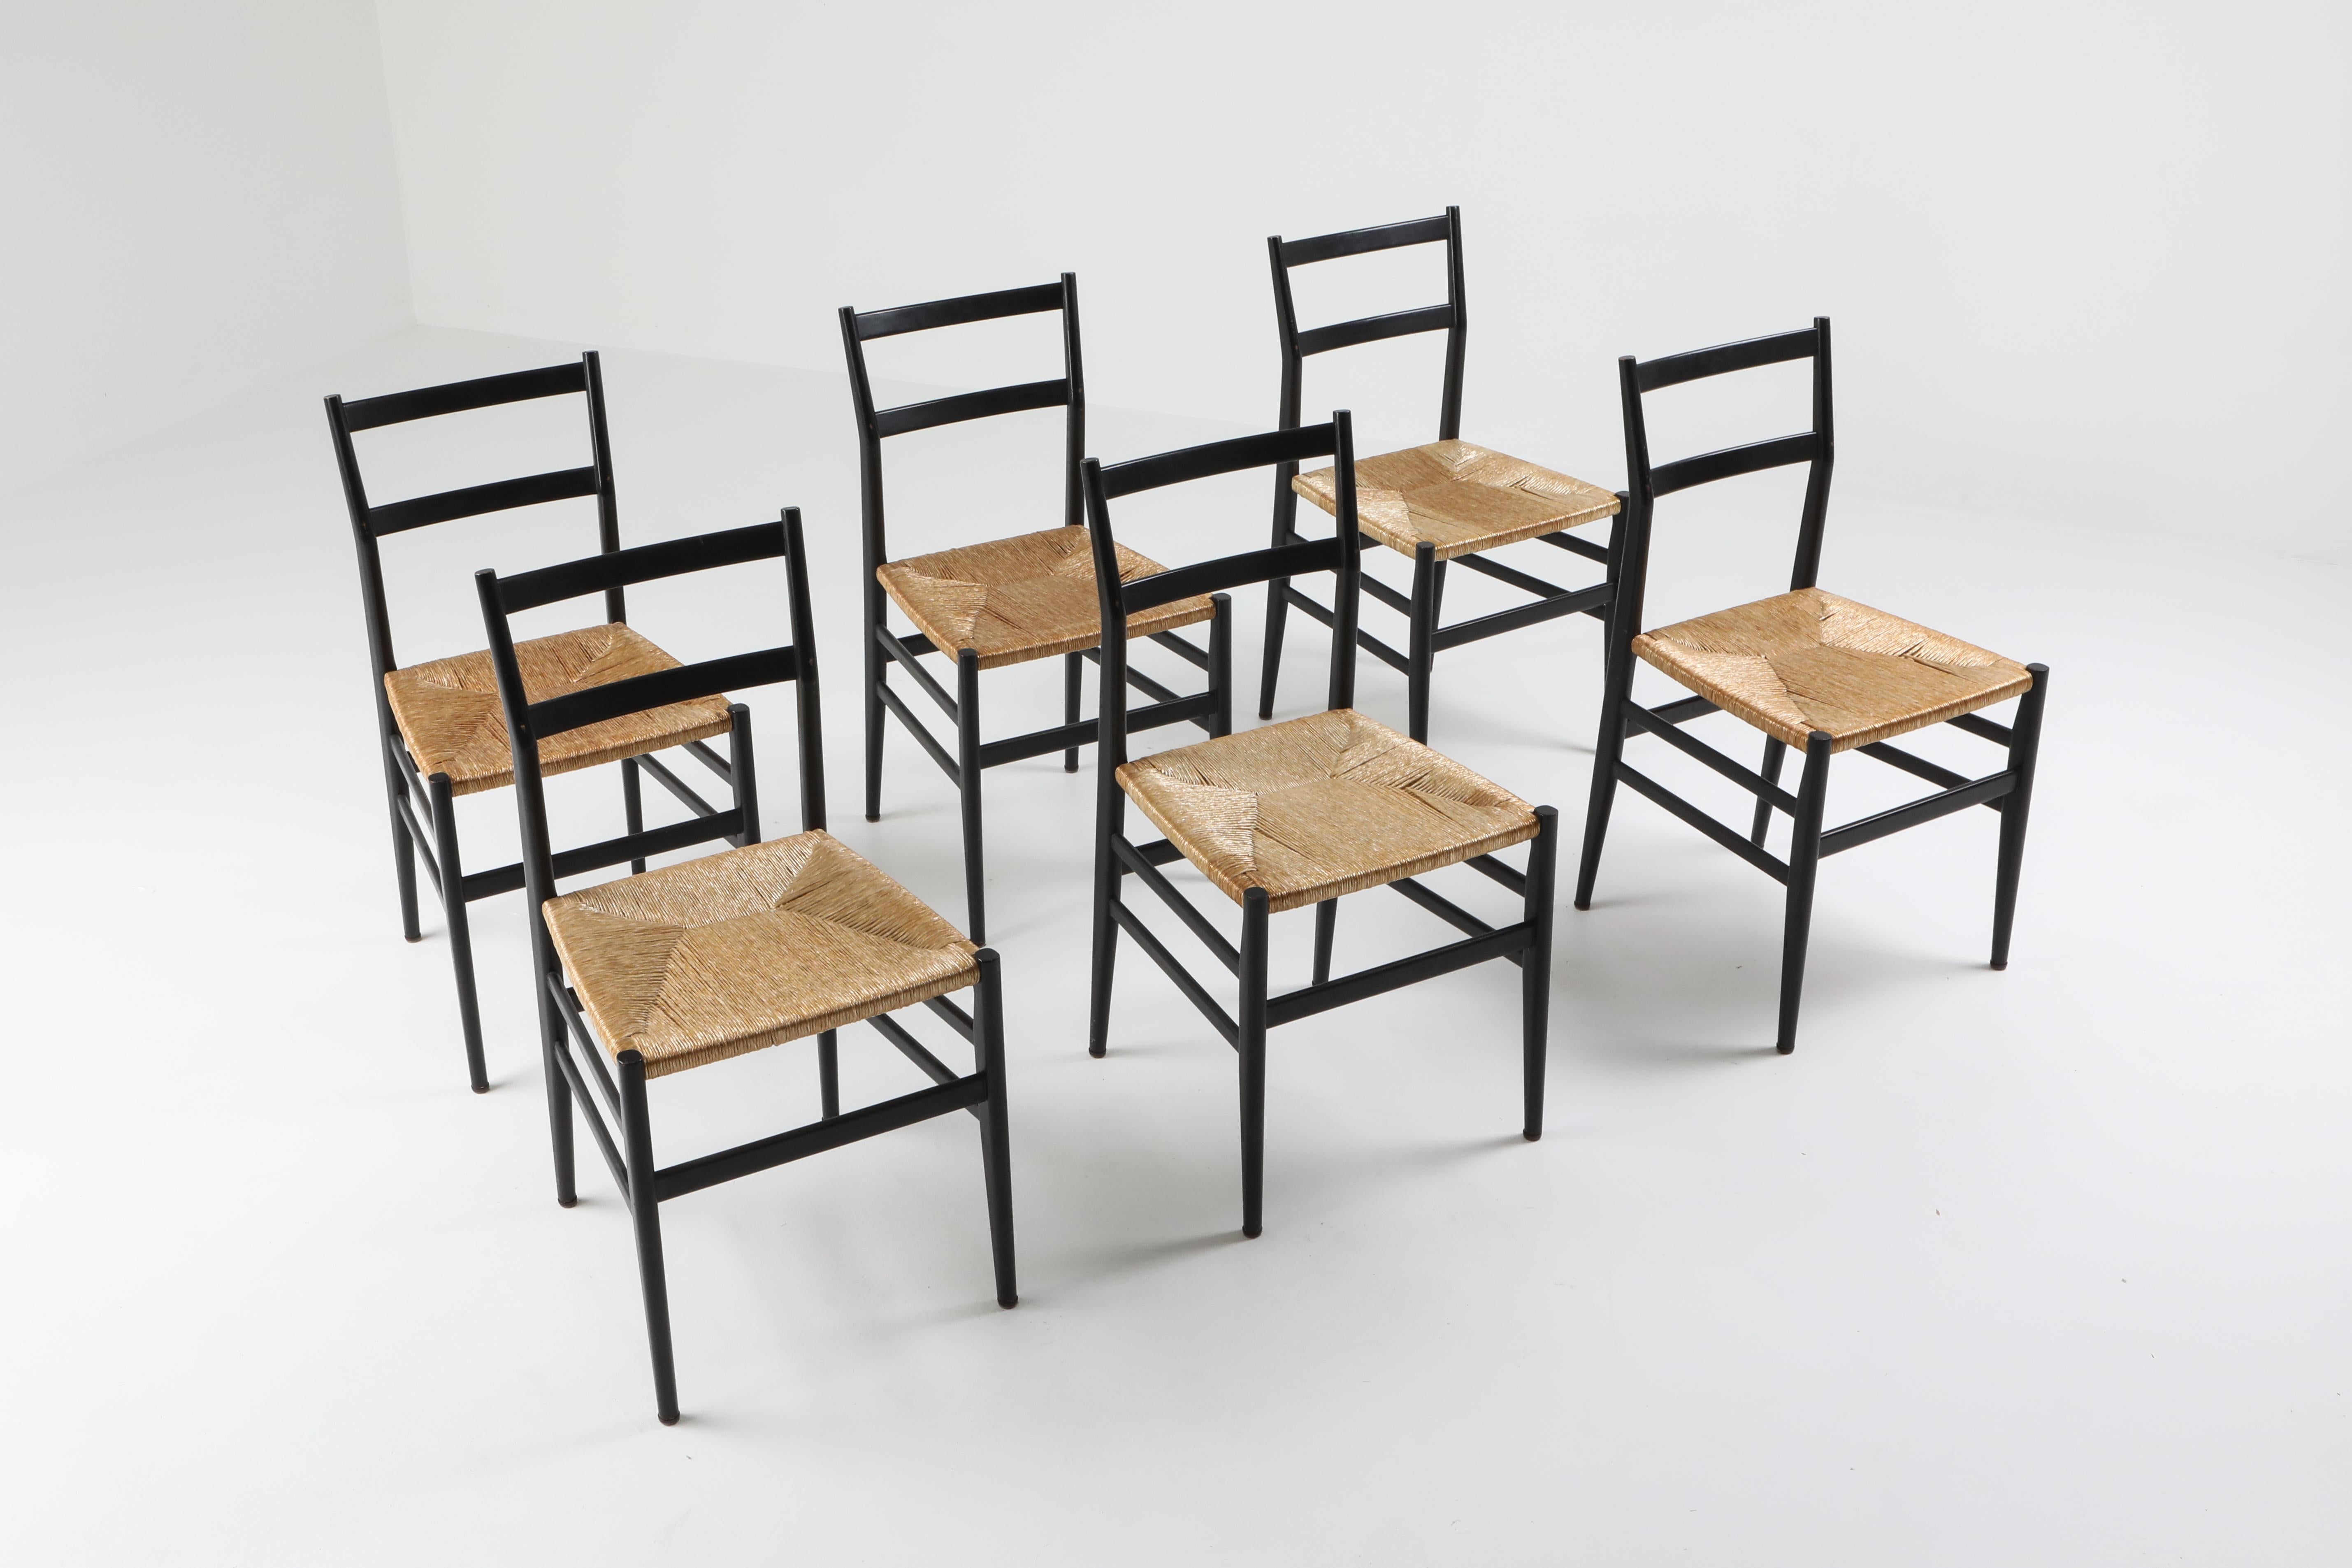 Rope and black ash, Gio Ponti, Cassina, set of six 

Six iconic Leggera chairs, black lacquered solid ash tree and braided straw seats, designed by Architect Gio Ponti in the 1951, produced by Cassina. The straw seats are in perfect condition. The